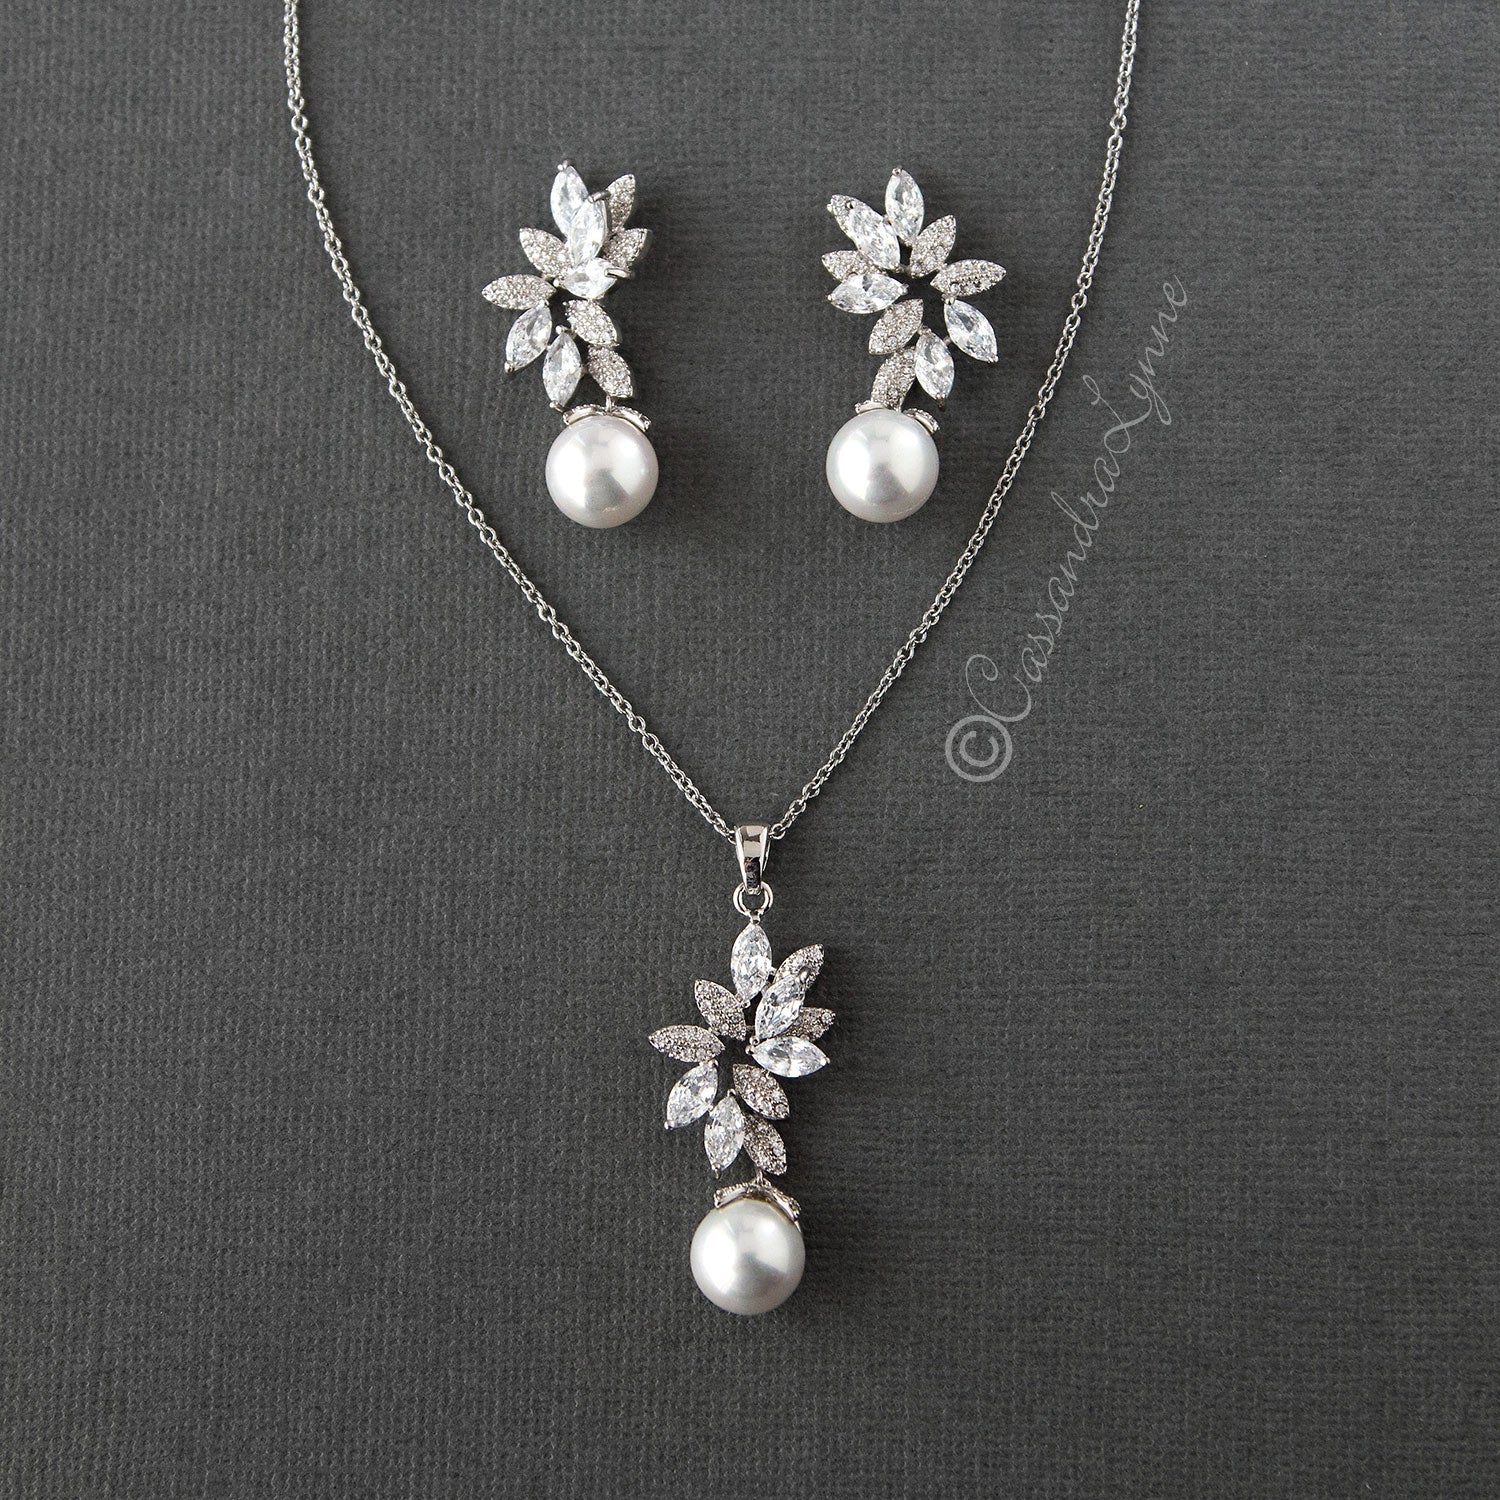 Pearl Pendant Necklace and Earrings Set with CZ Jewels - Cassandra Lynne